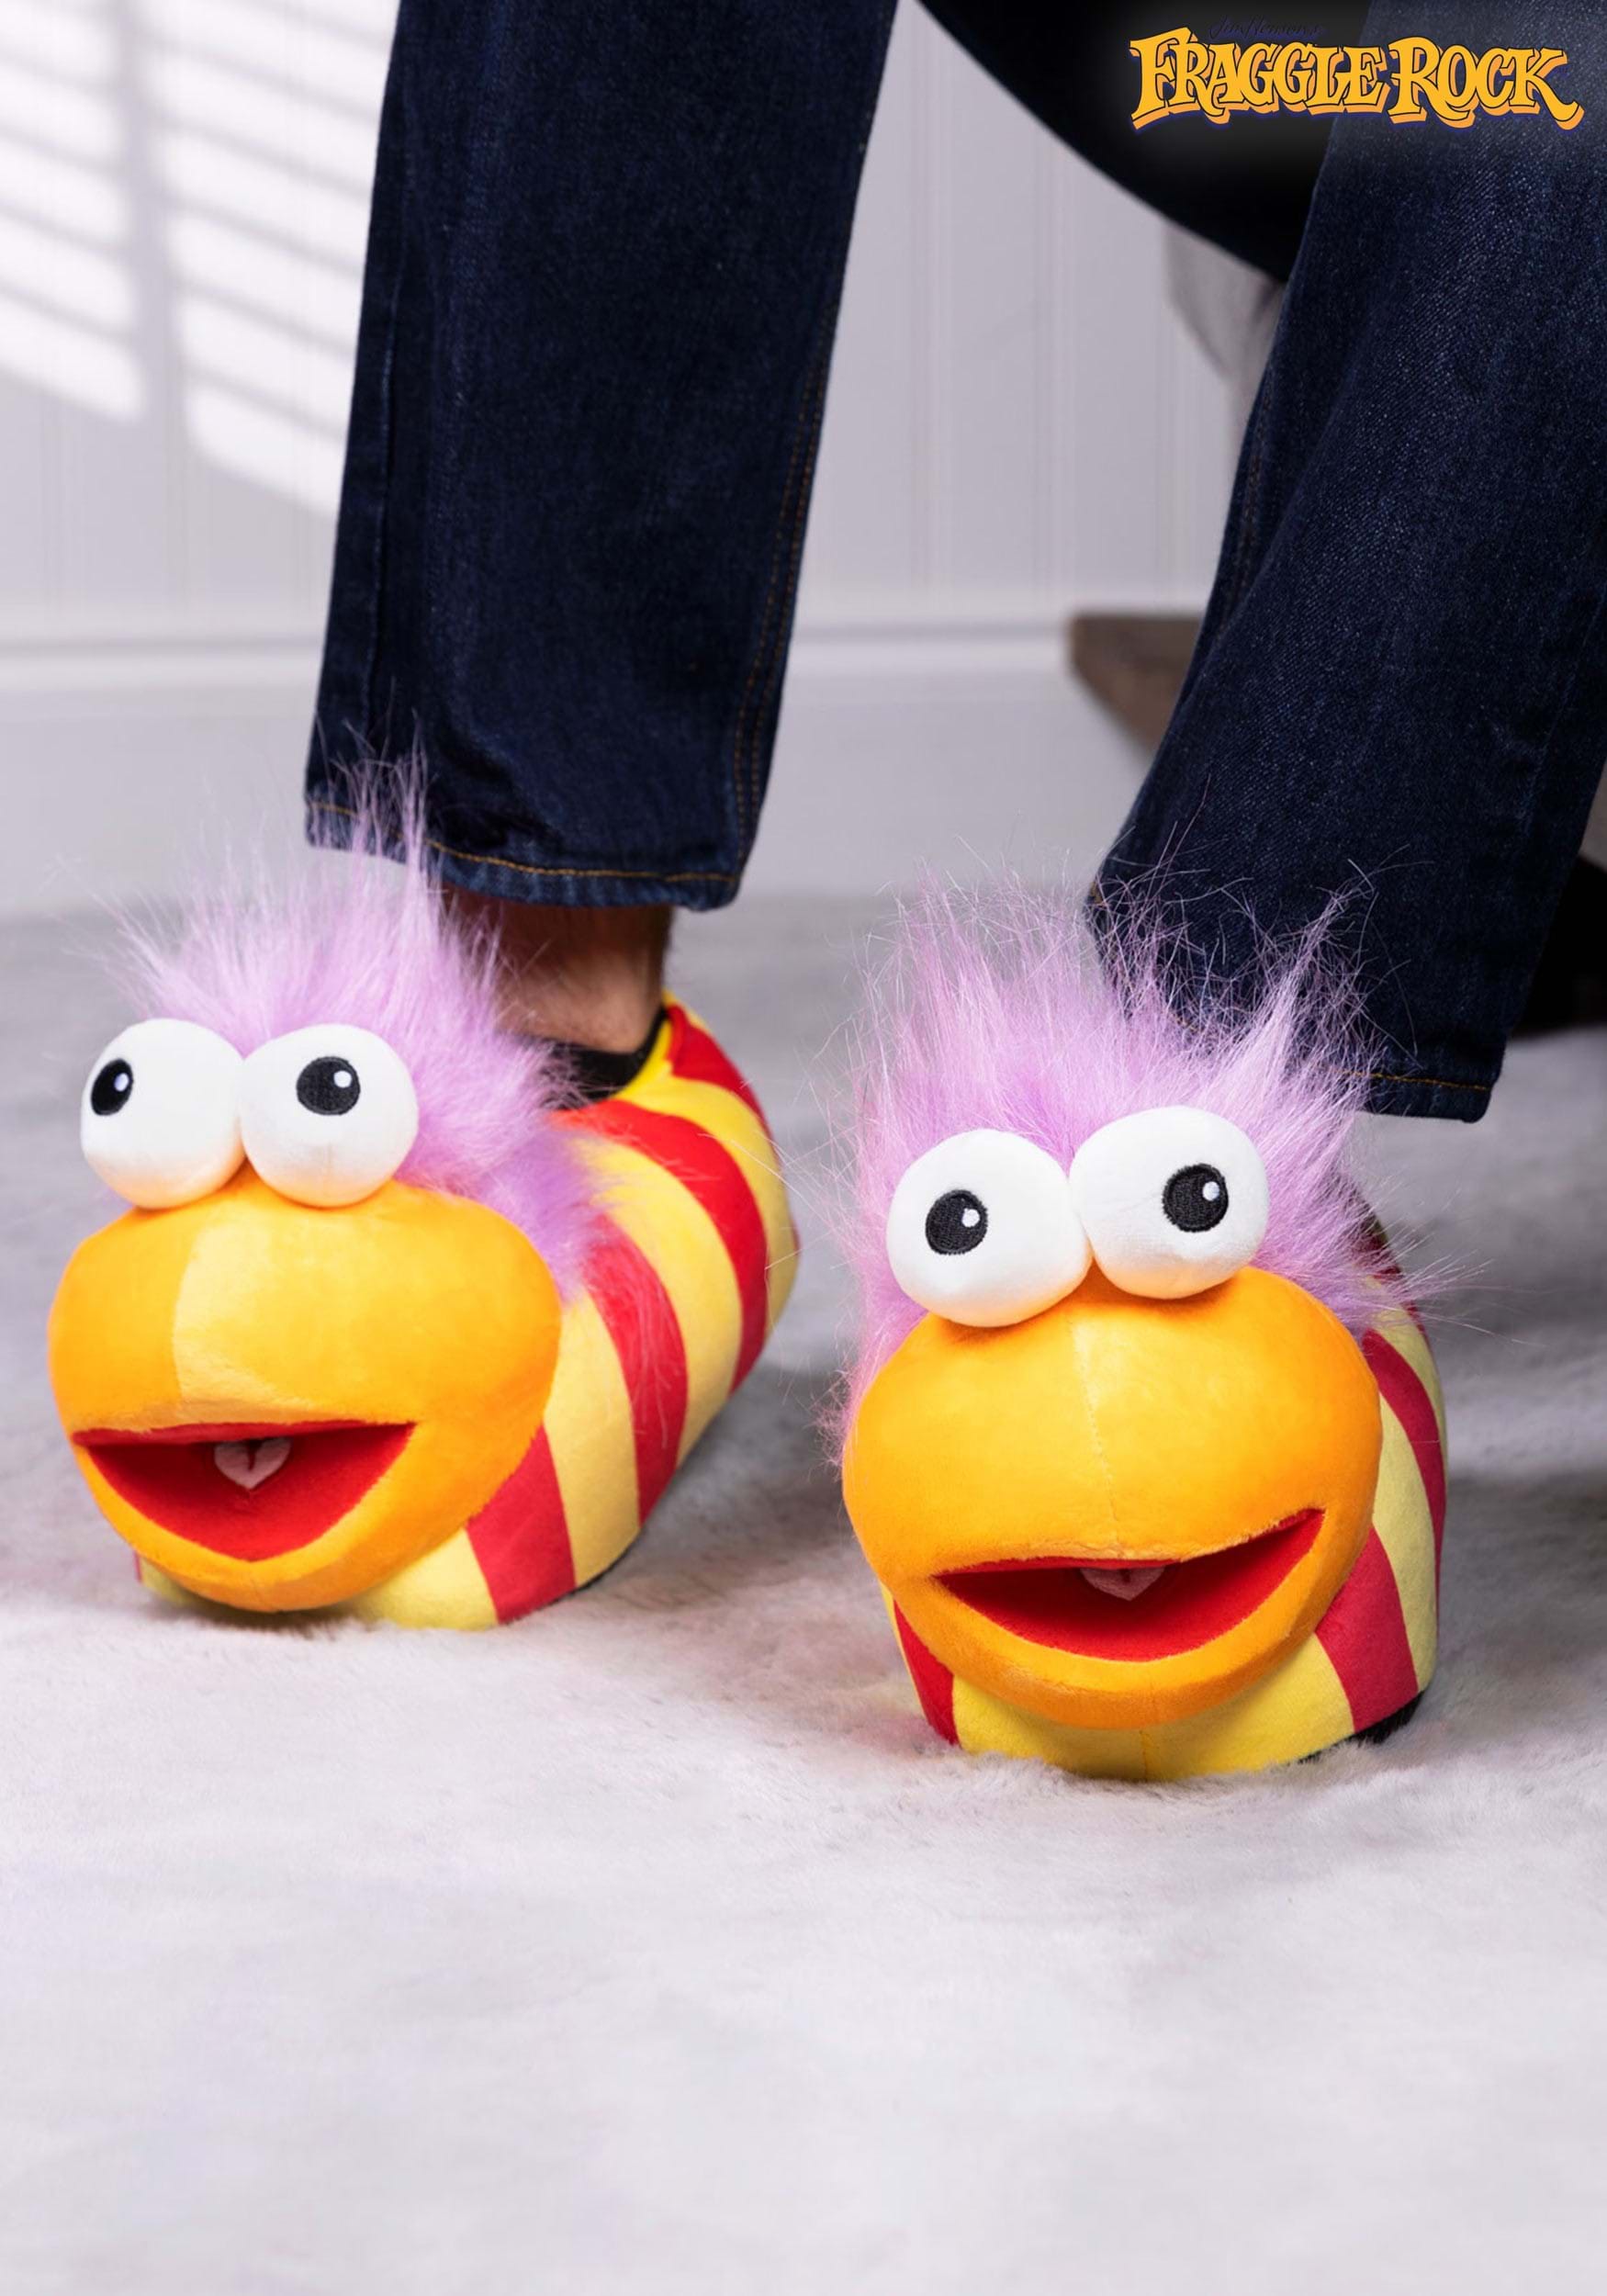 https://images.fun.com/products/85391/1-1/adult-fraggle-rock-gobo-plush-slippers.jpg